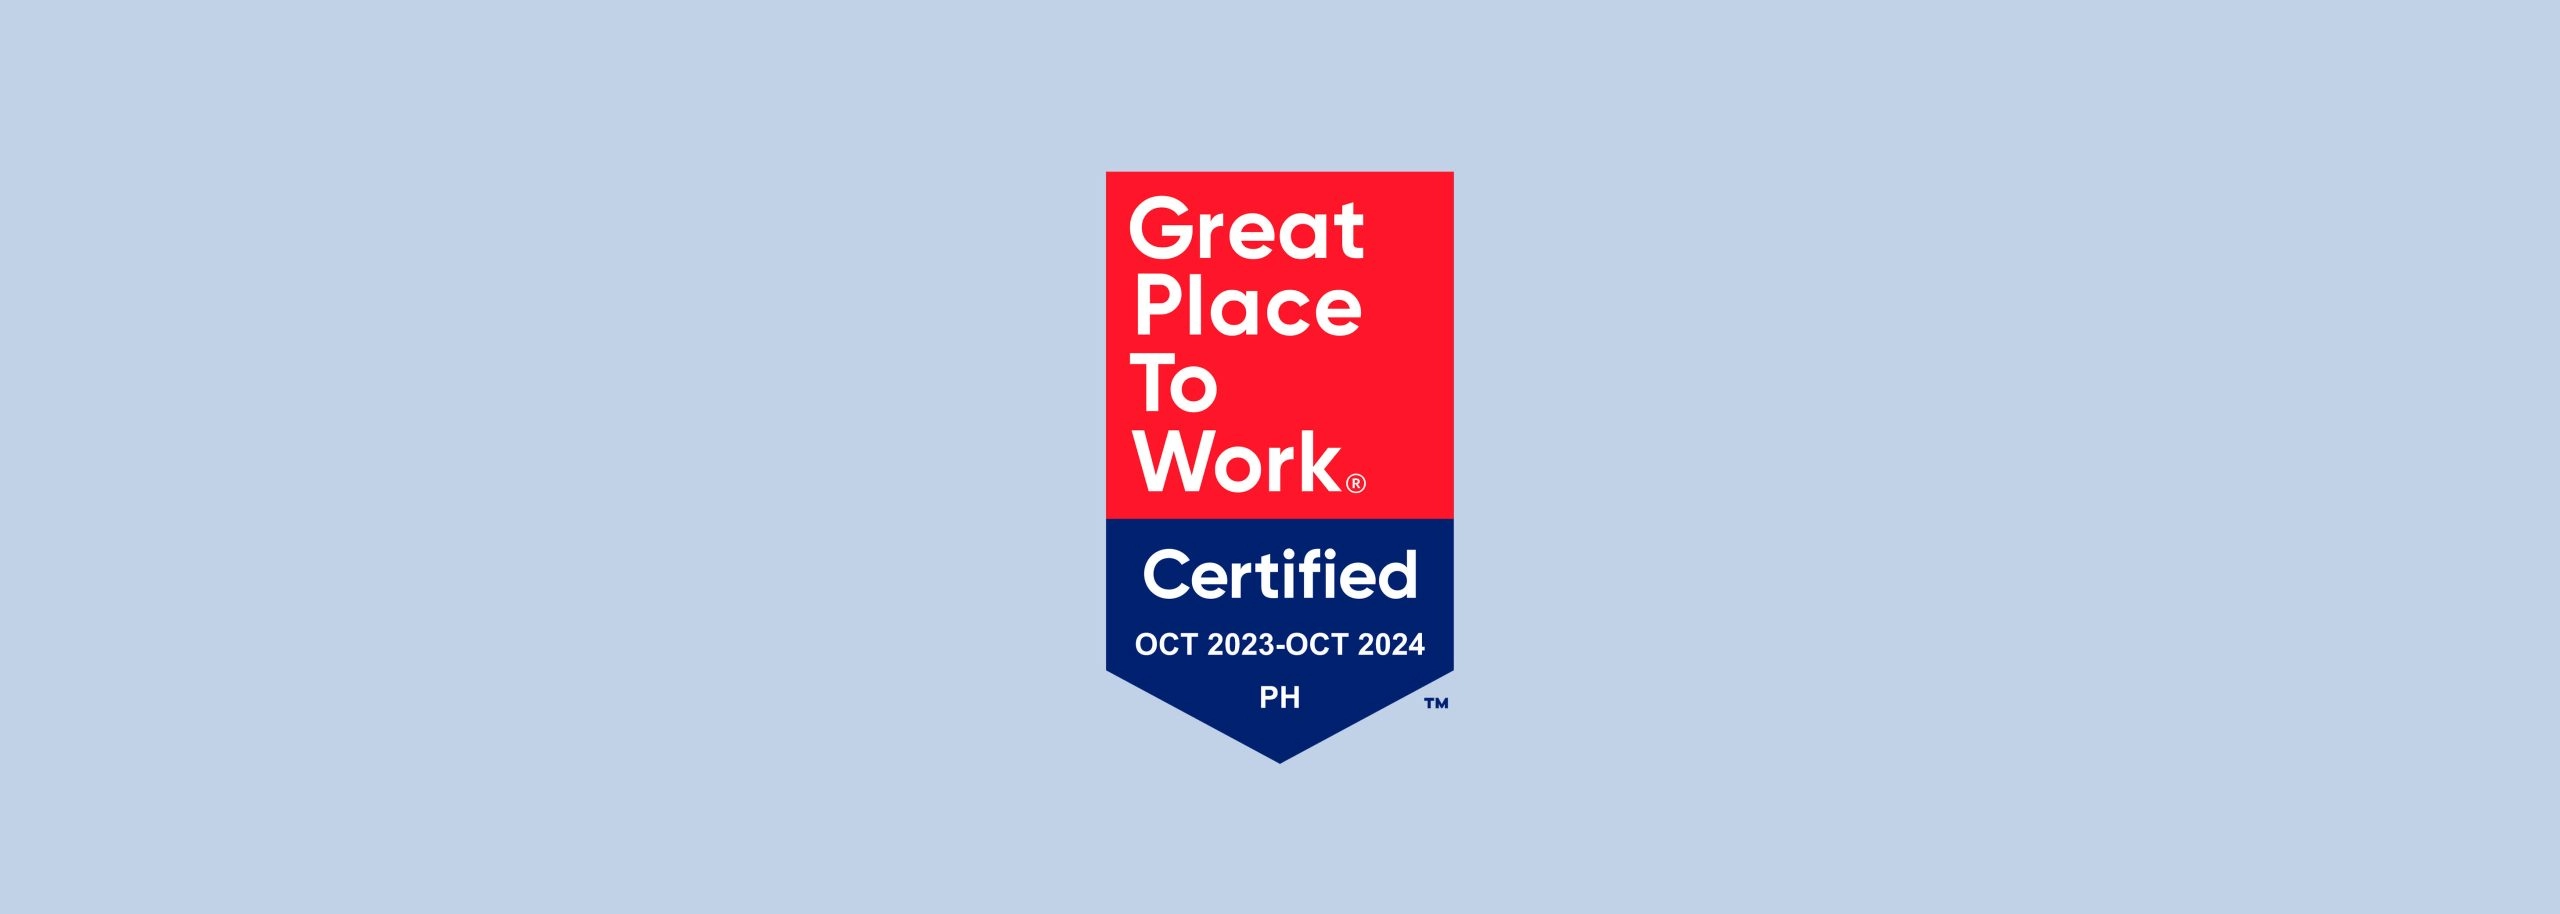 Startek® secures another prestigious Great Place to Work Certification™ in the Philippines for 2023